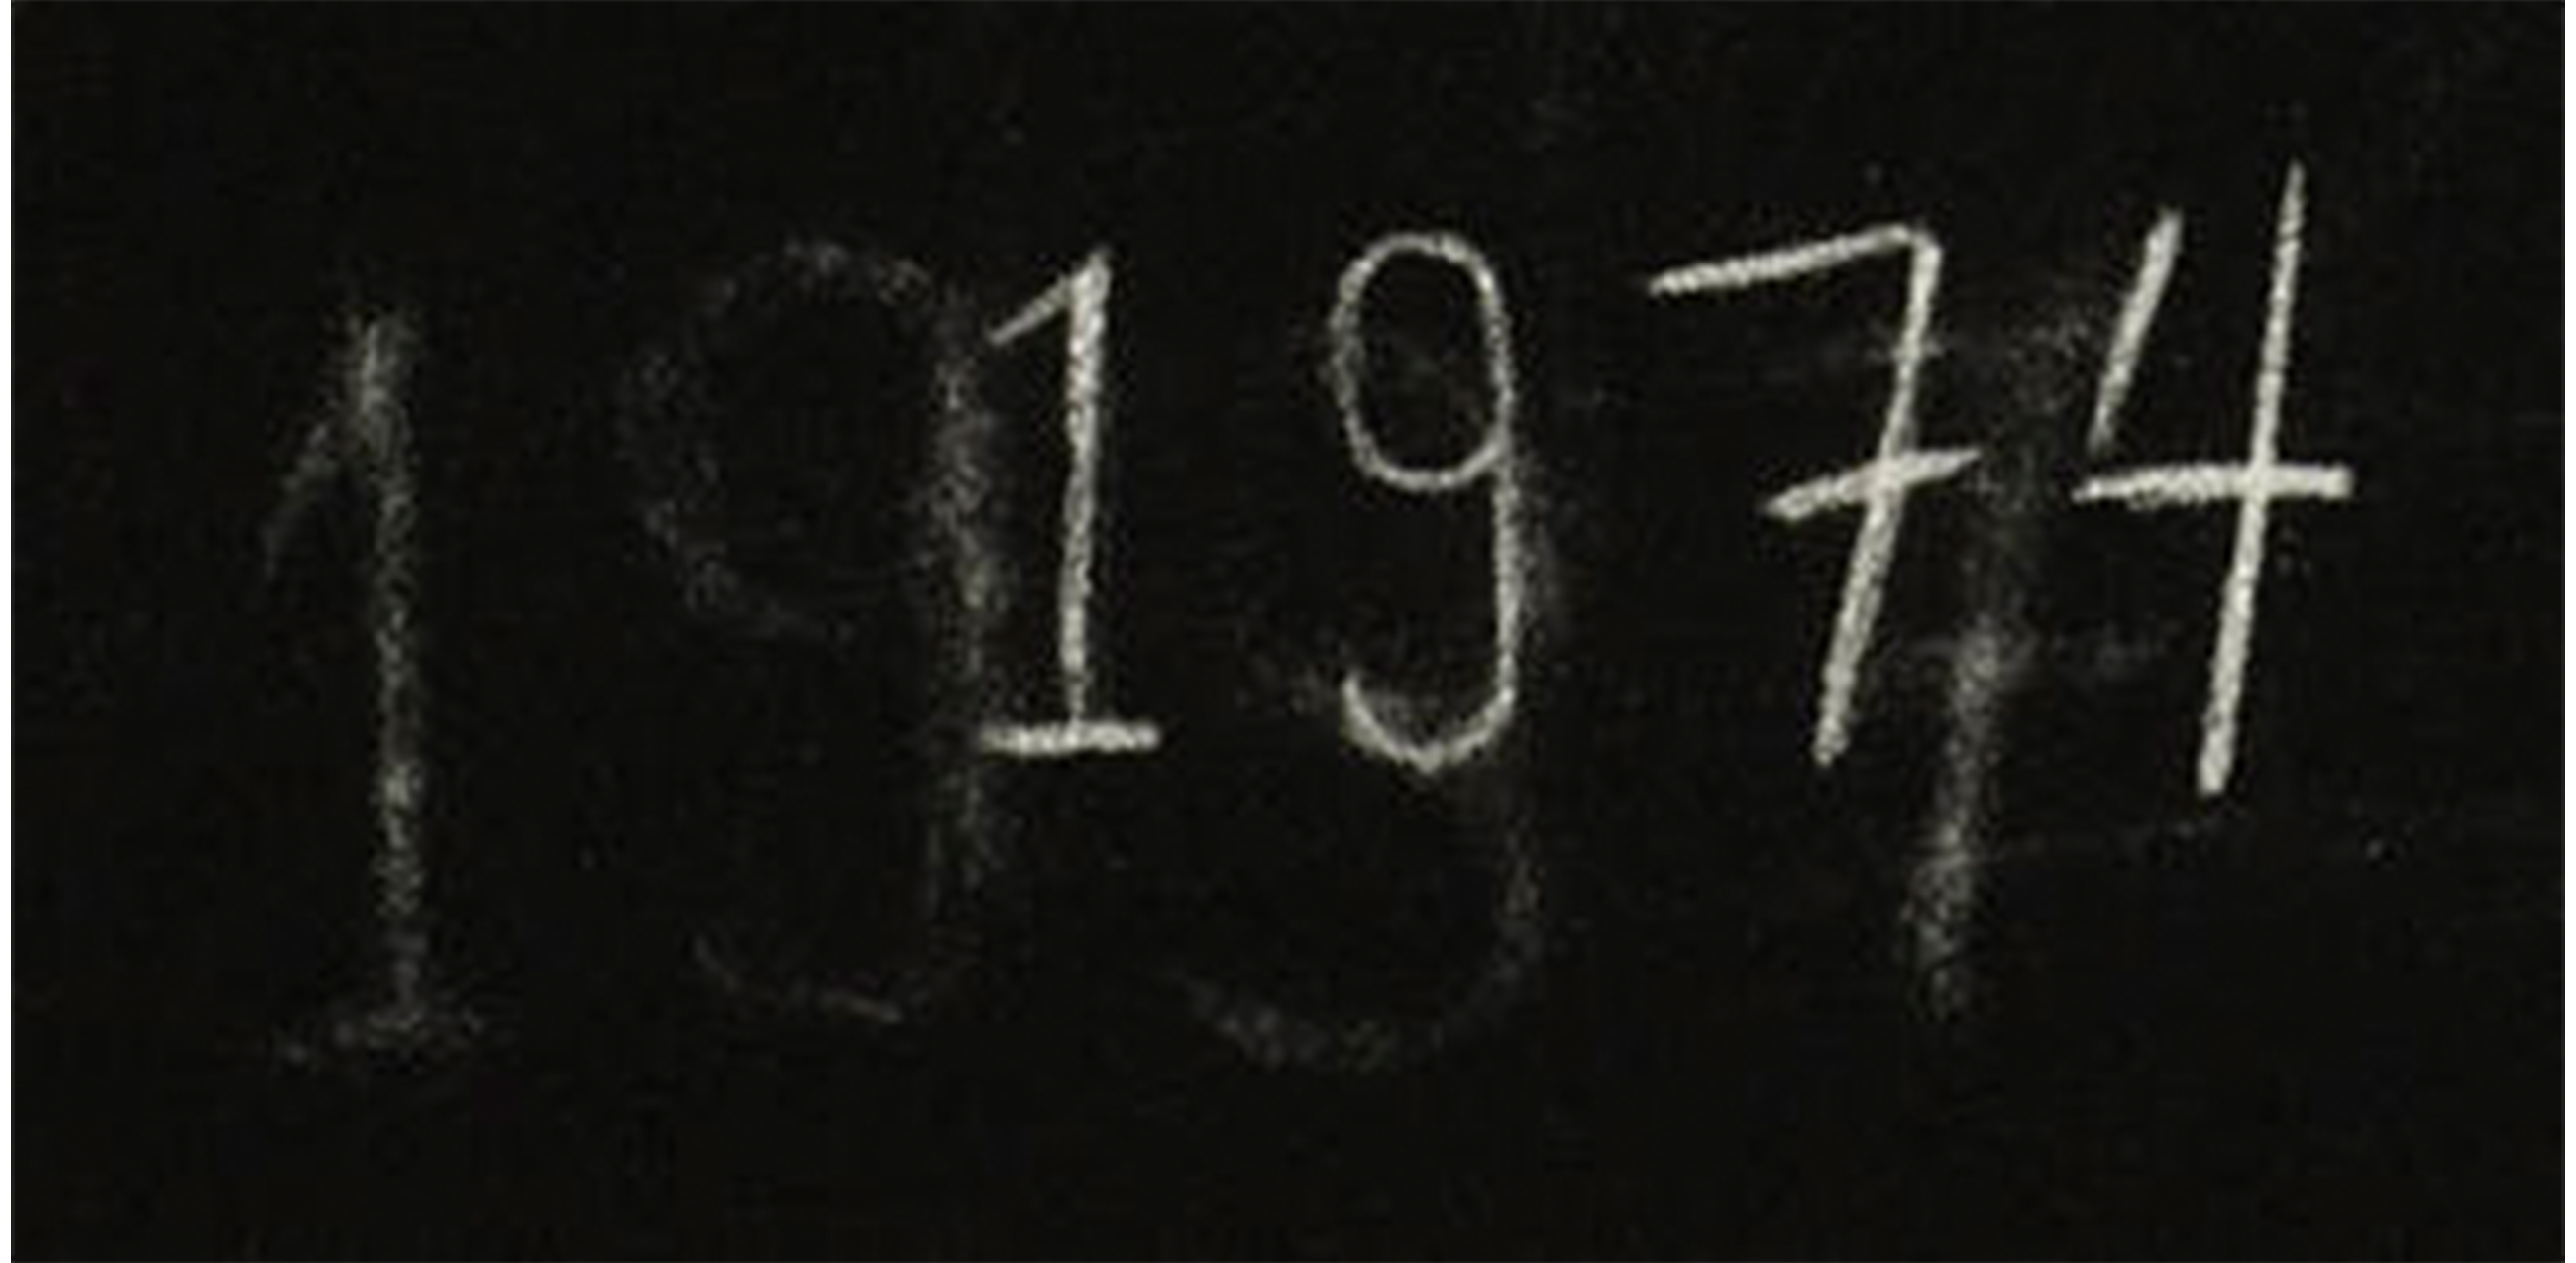 black chalkboard with "1974" written on it in white. to the left of that, another version of the "1974" written in white, but faded as though it has been erased